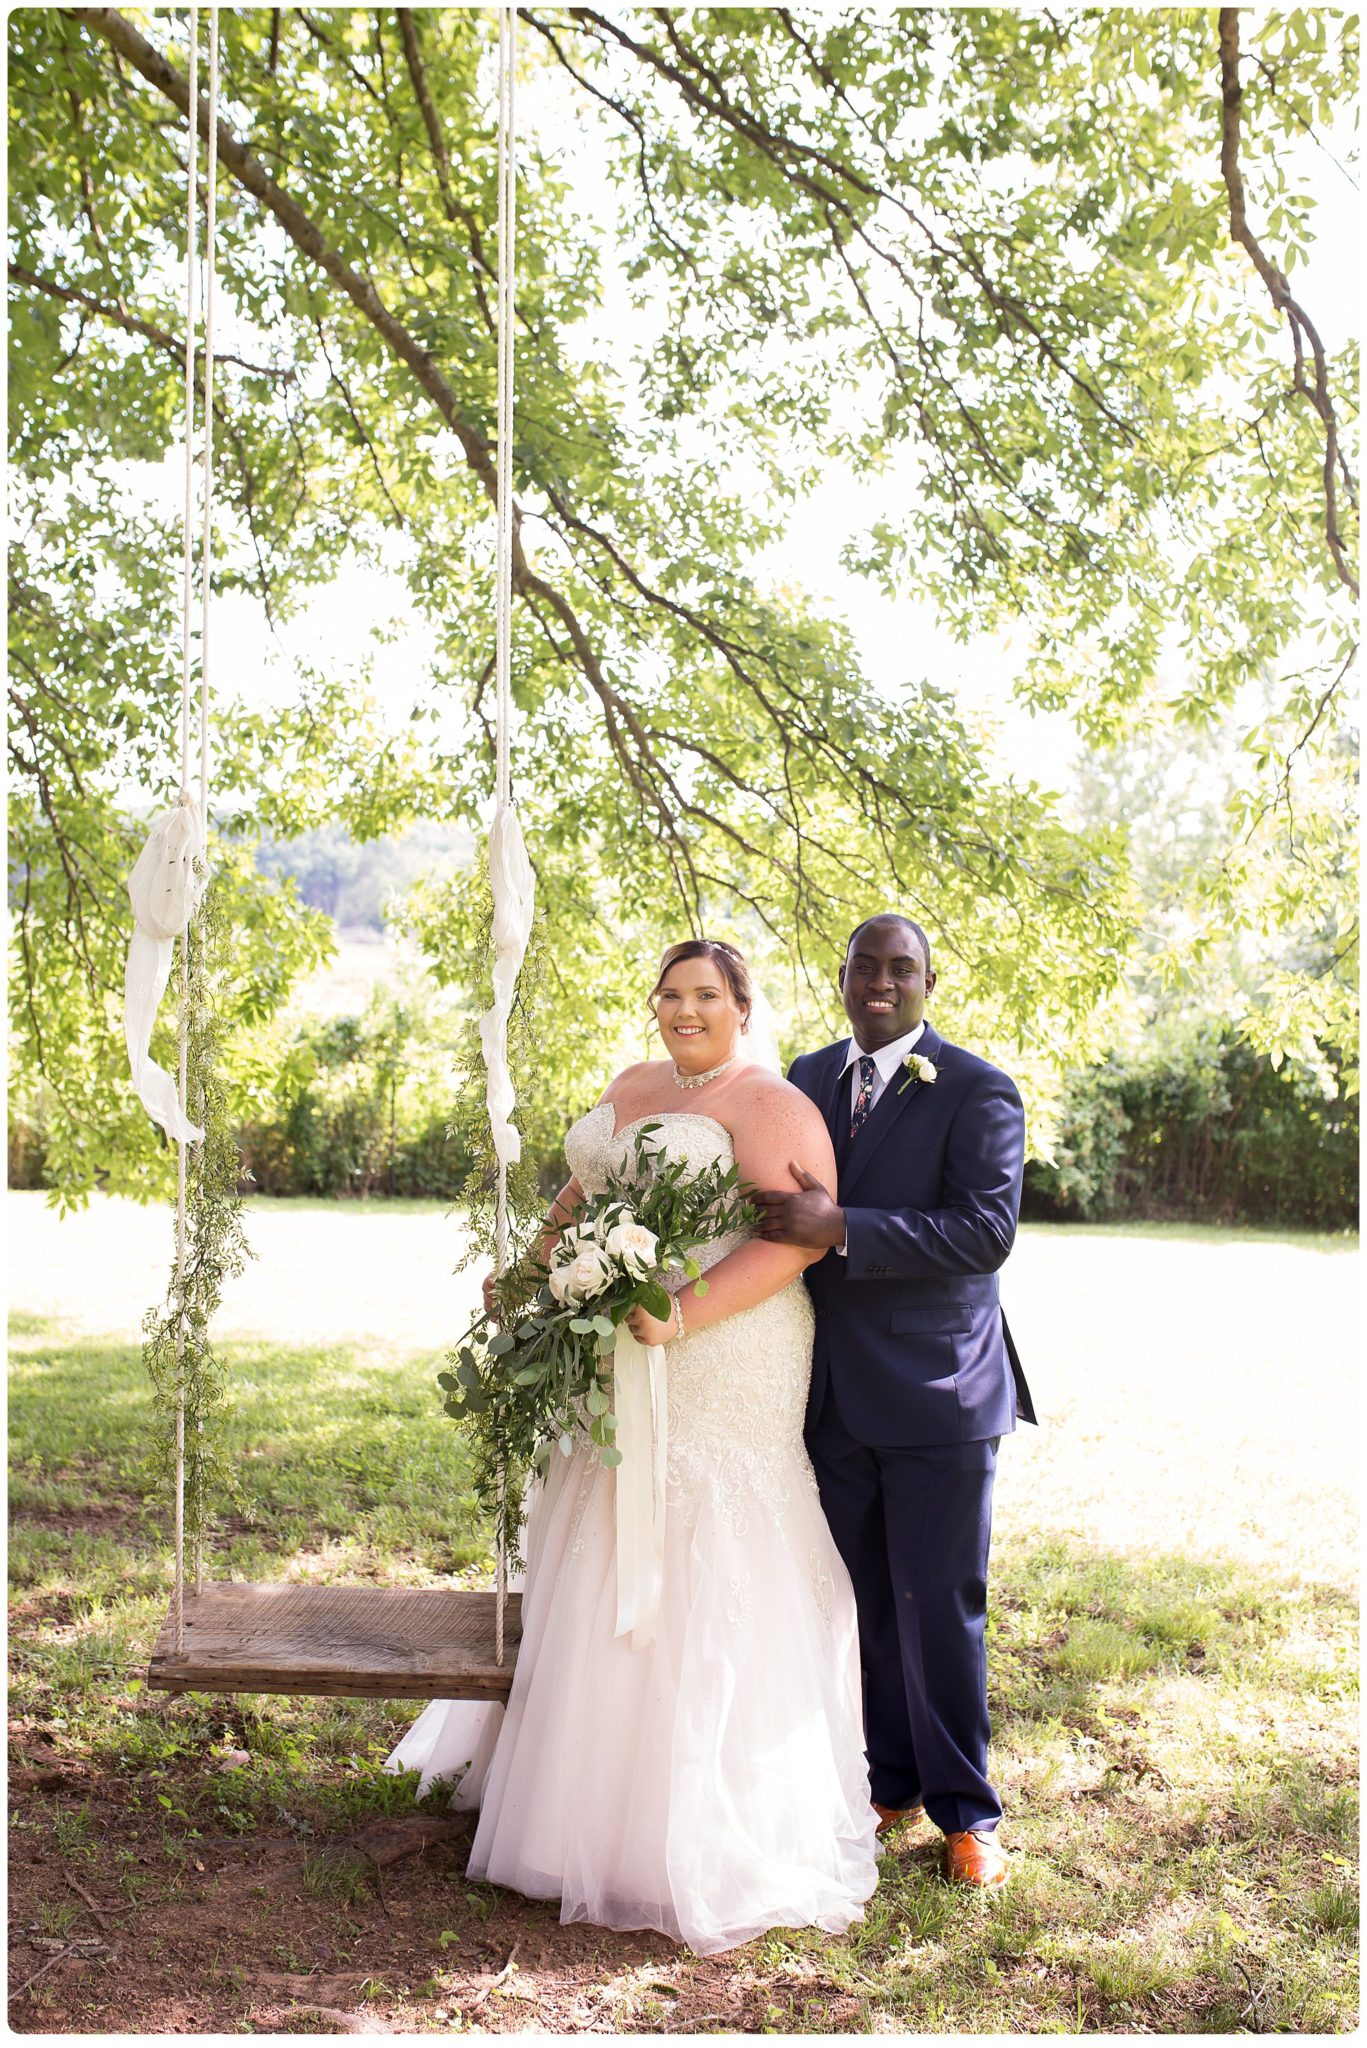 Nashville wedding at Iriswoods, Southern Belles and Blooms, navy tuxedo, whimsical garden wedding, southern wedding, southern bride, nashville bride, melanie grady photography, the best nashville wedding photographer, interracial couple wedding, mt juliet, tree swing